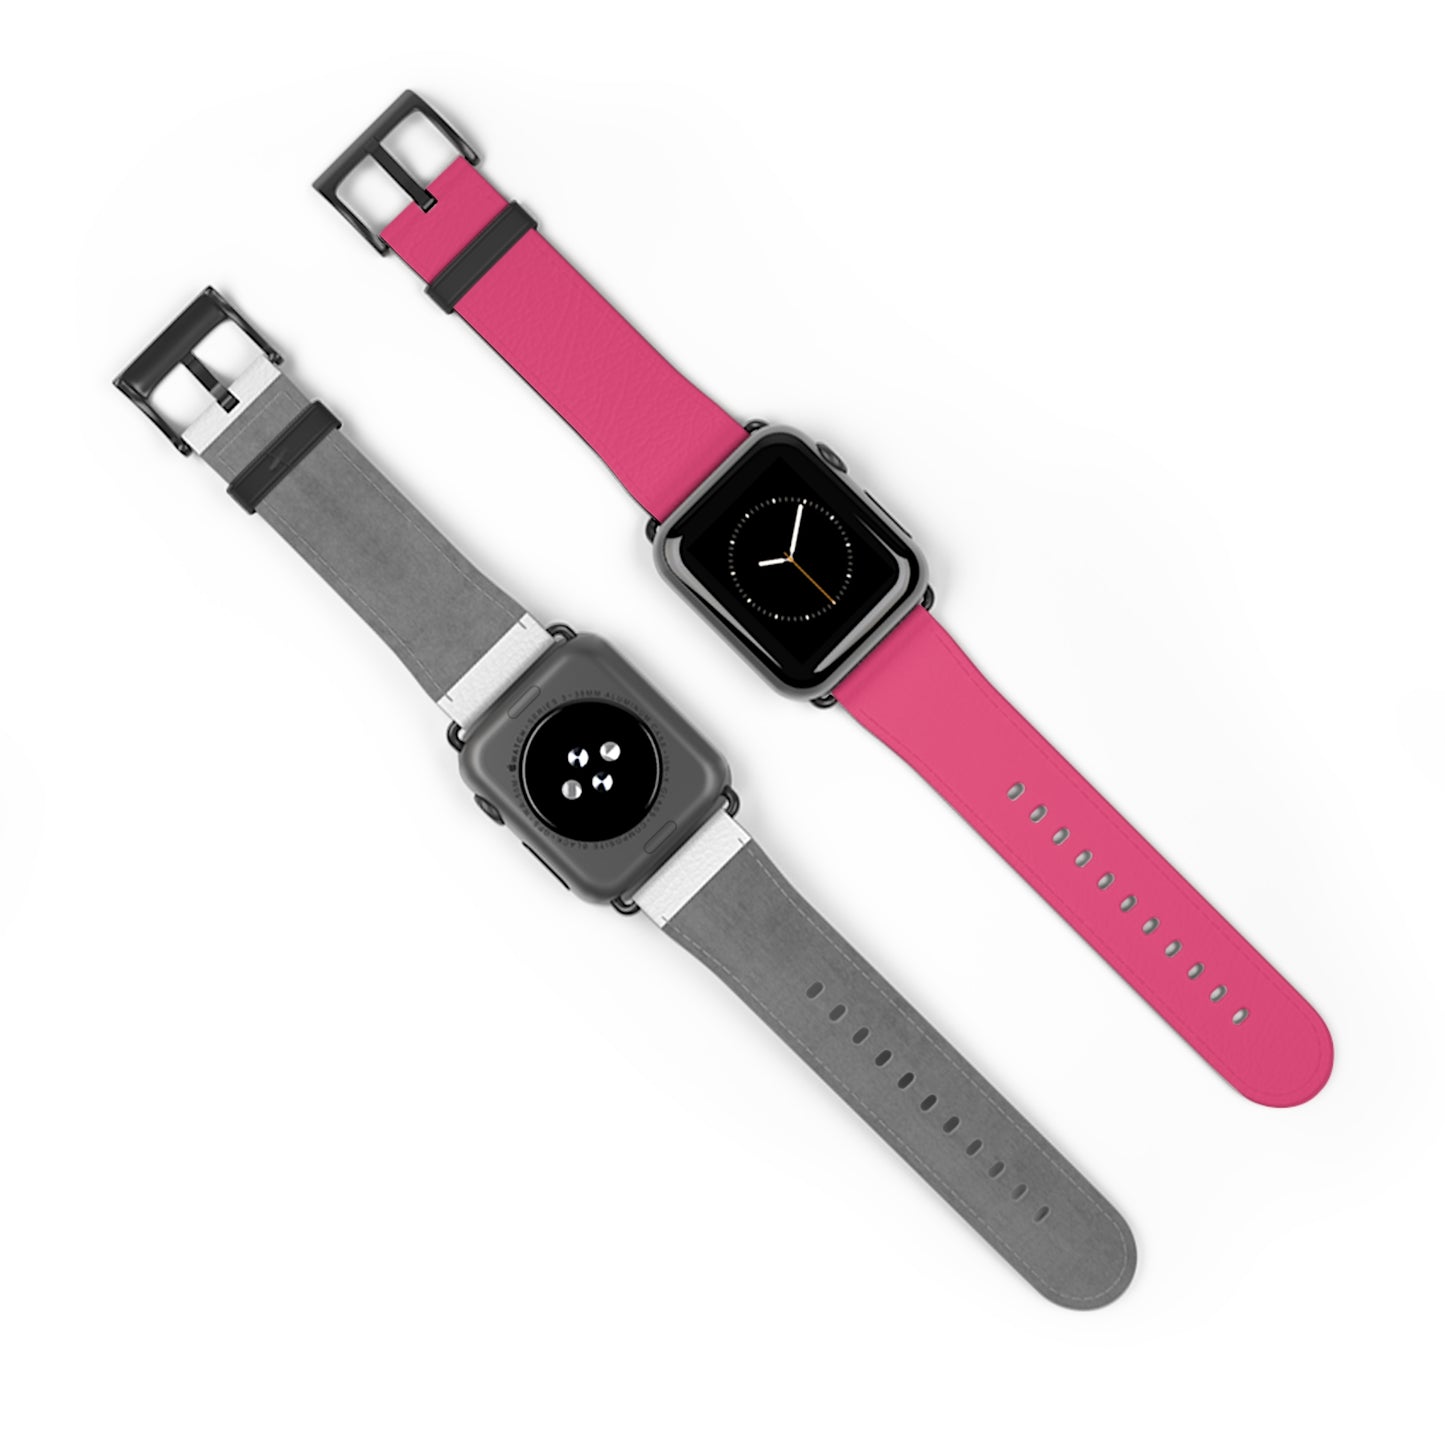 RED APPLE® WATCH BAND- PANTONE® 205